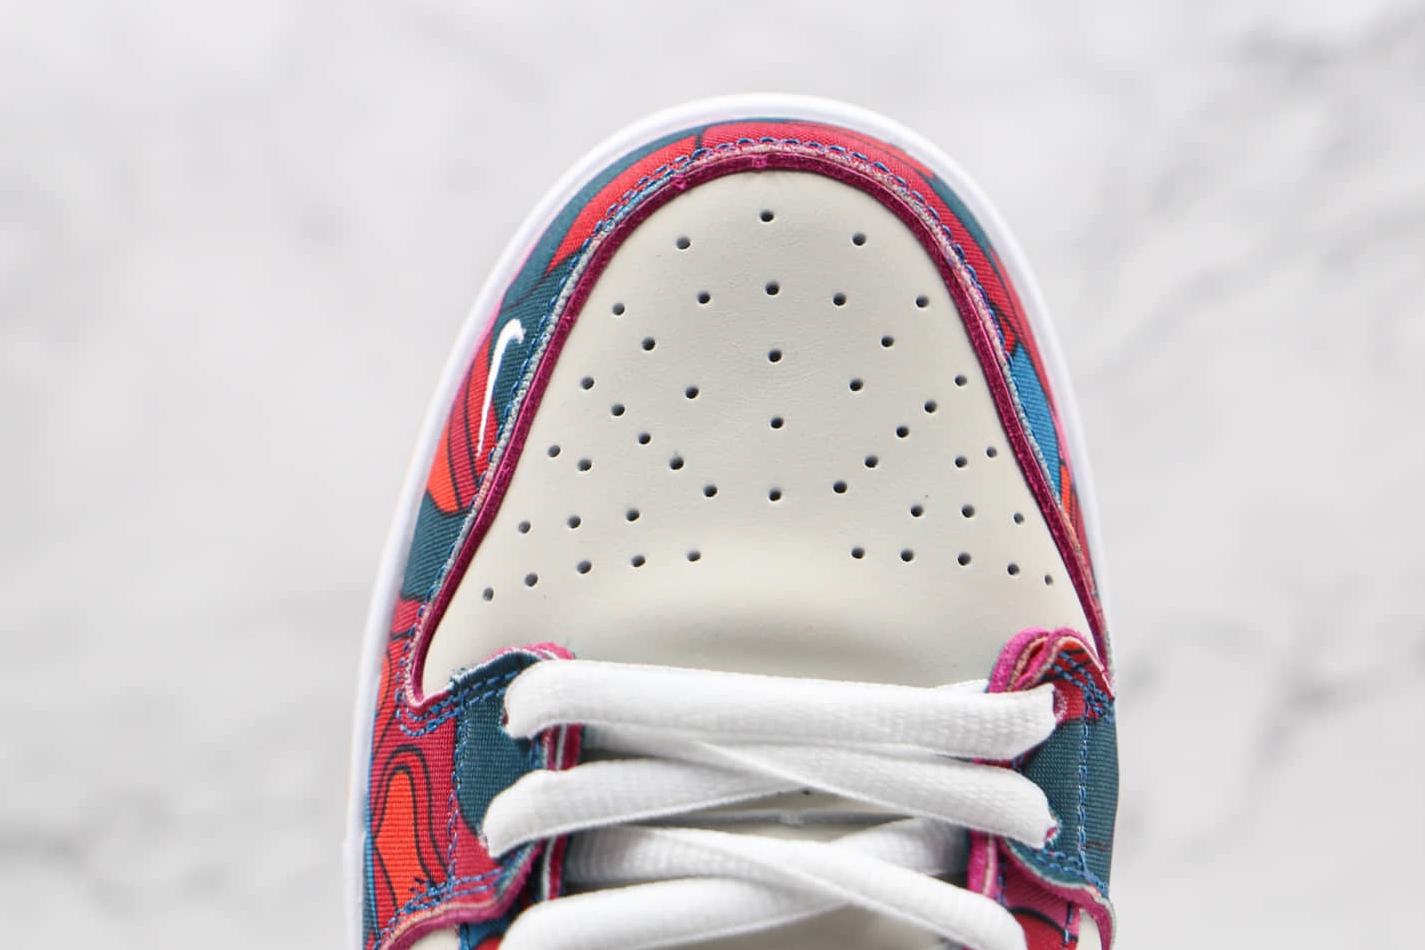 Nike Parra x Dunk Low Pro SB 'Abstract Art' DH7695-600 - Limited Edition Sneaker Release